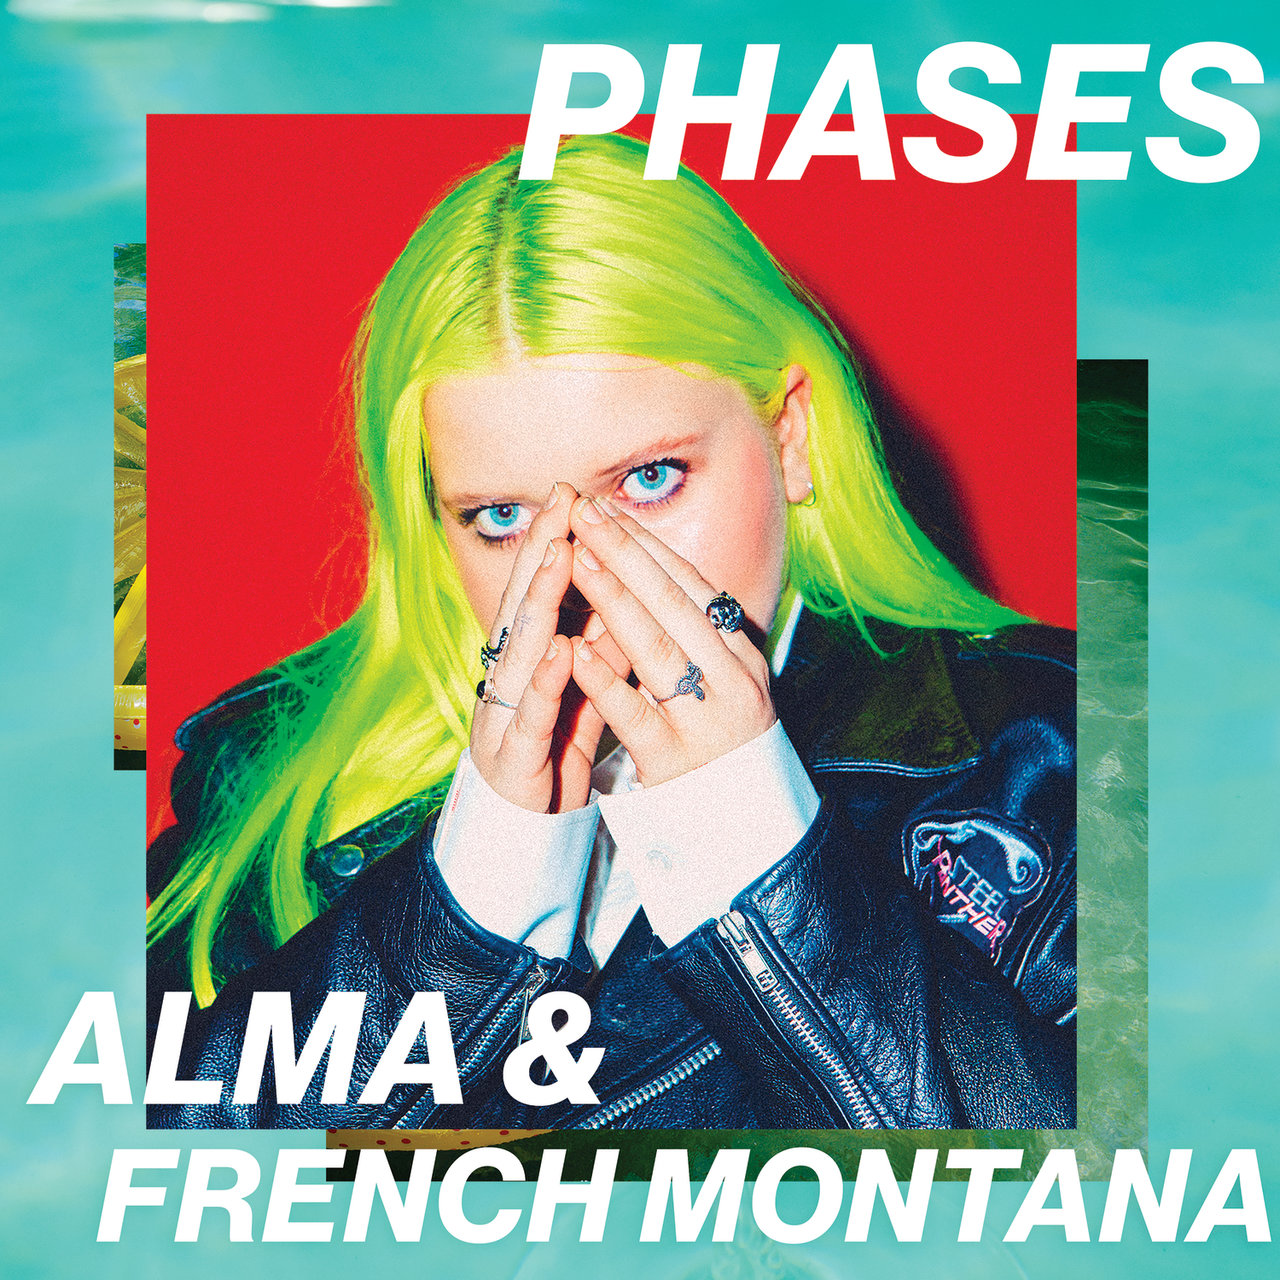 ALMA & French Montana Phases cover artwork